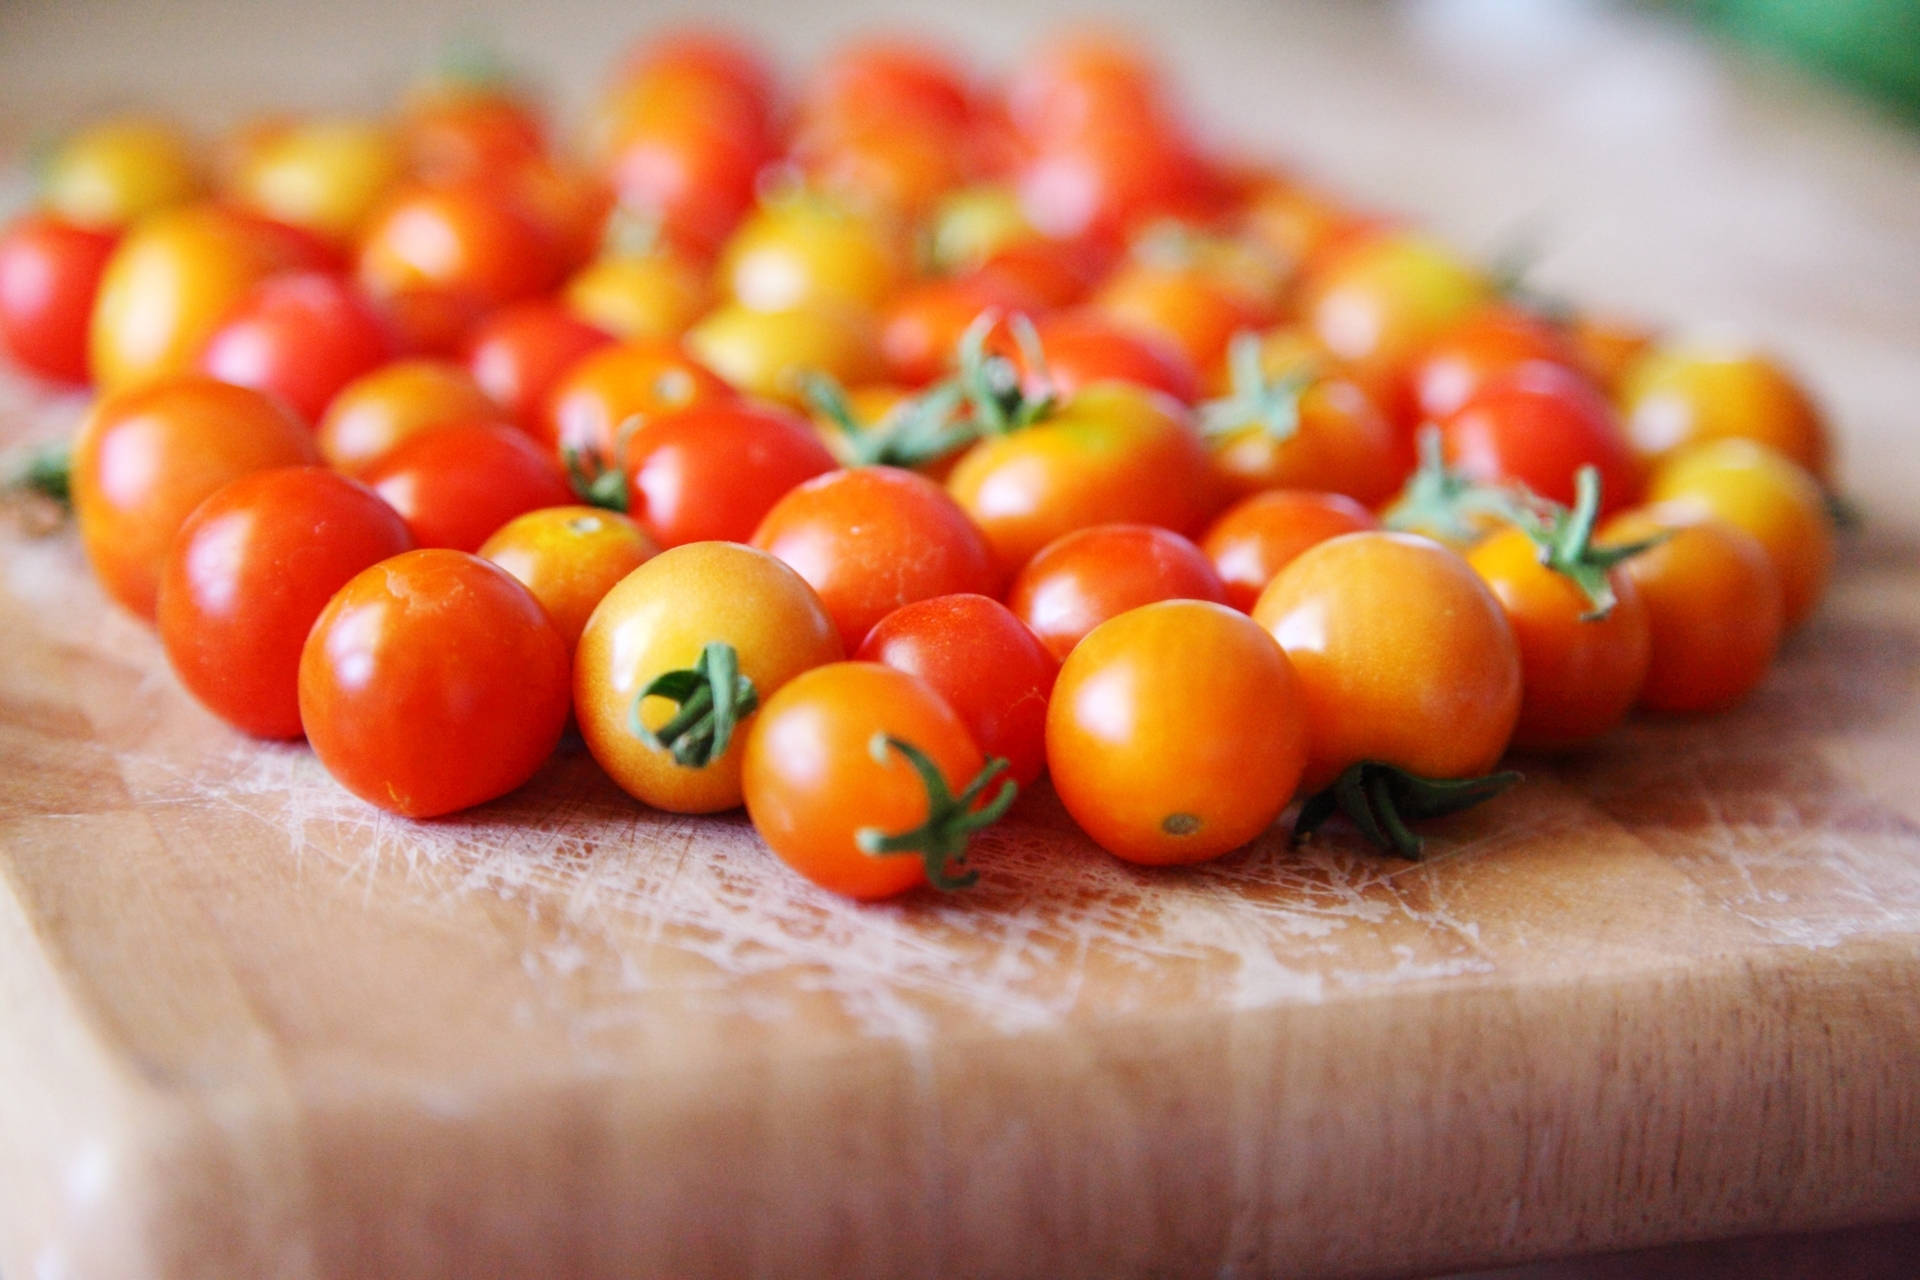 Sungold Tomato Fruits On Wooden Table Wallpaper